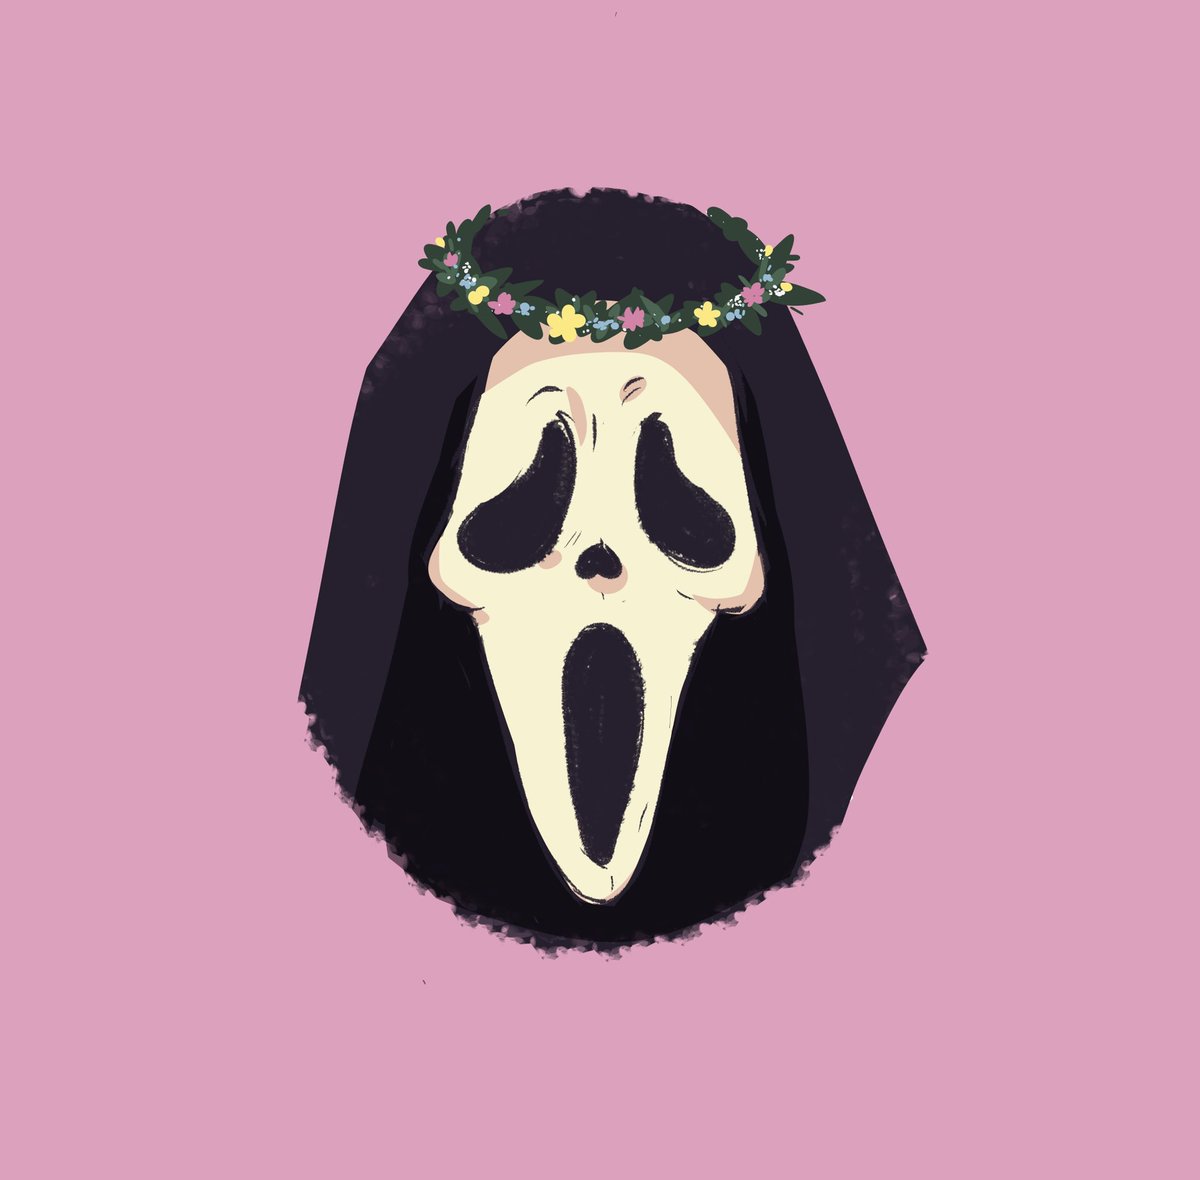 Ghostface HD Wallpapers 1000 Free Ghostface Wallpaper Images For All  Devices